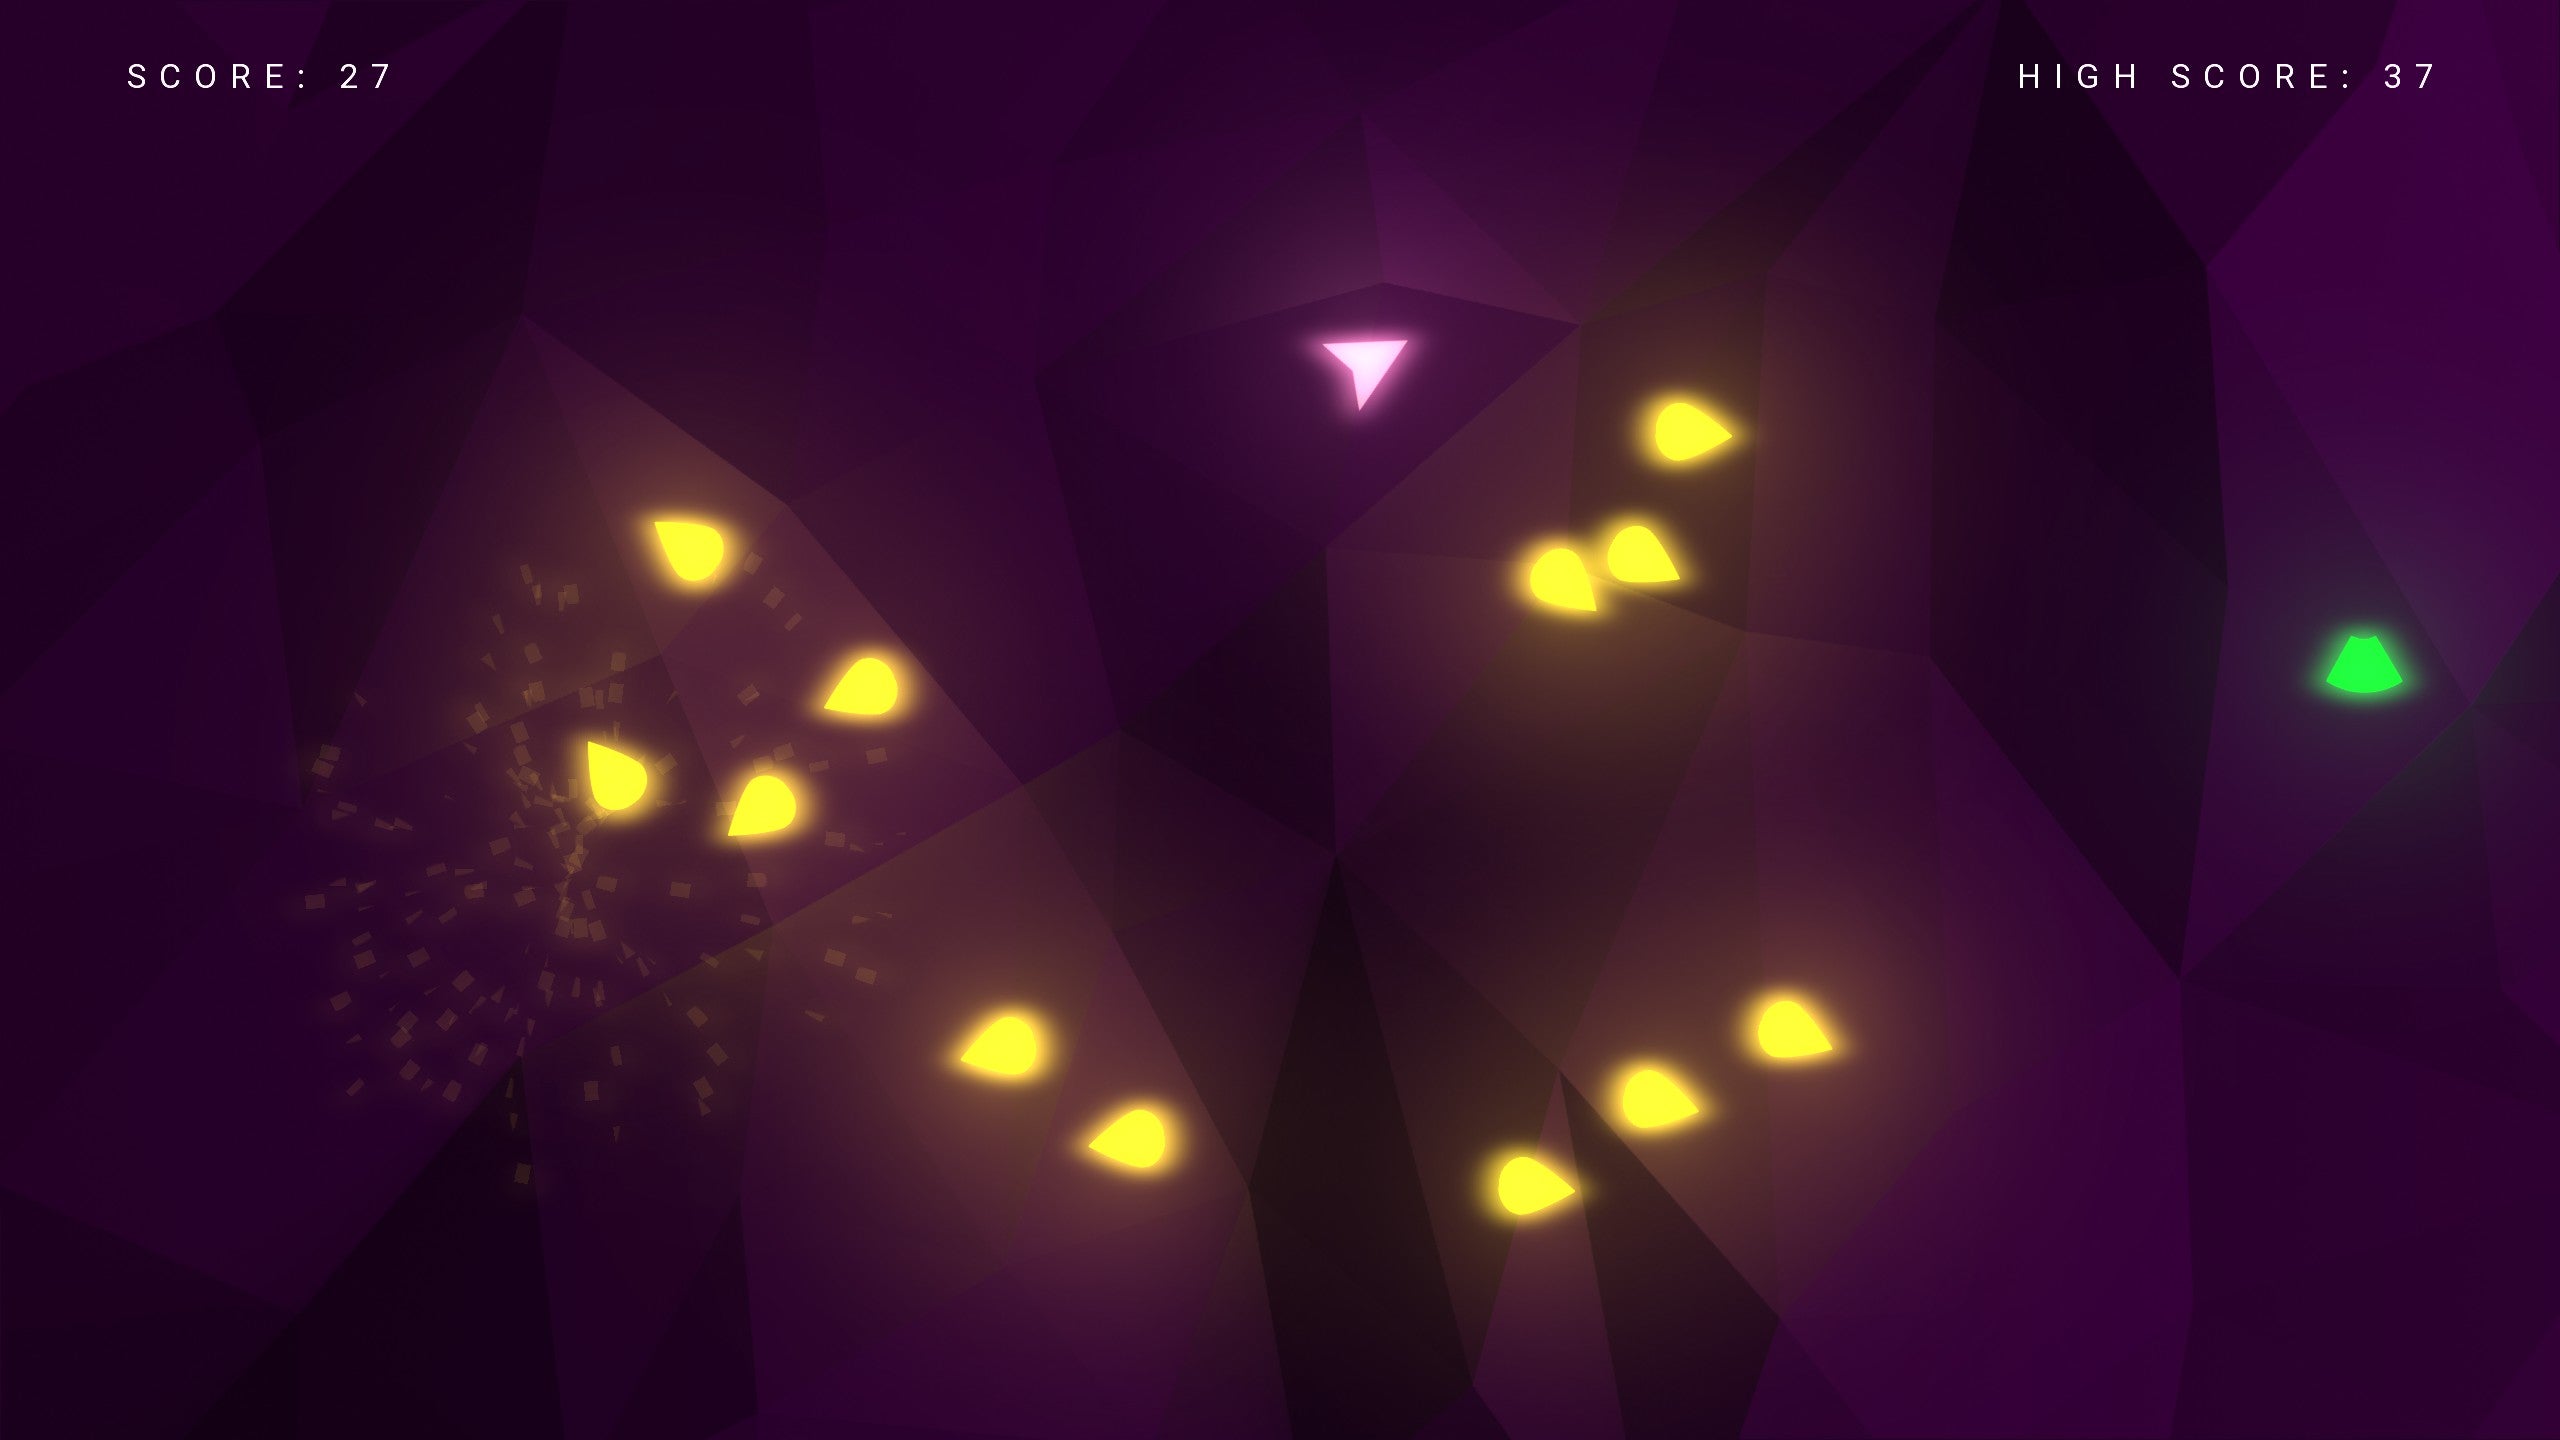 A small pink, arrow-shaped ship flies through a sea of glowing yellow enemies in Dextram